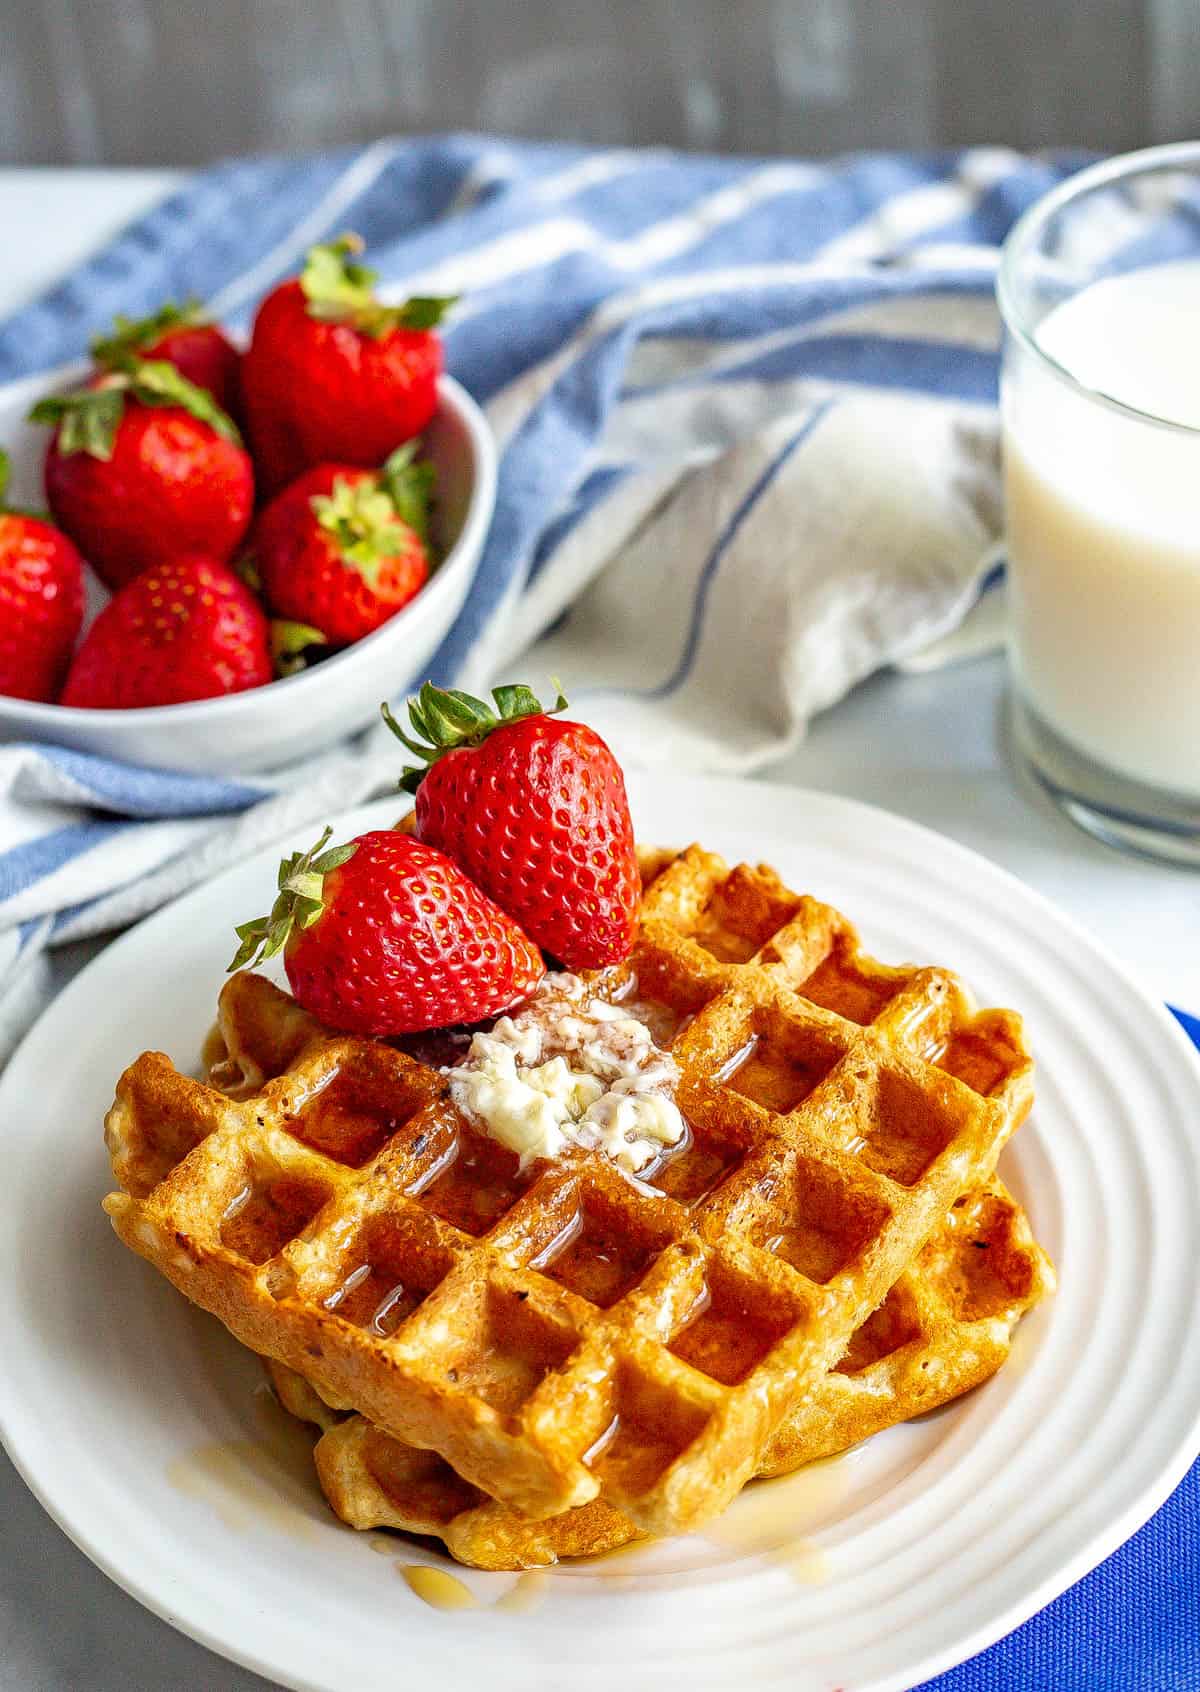 Healthy homemade waffles topped with butter, maple syrup and strawberries with milk and strawberries in the background.